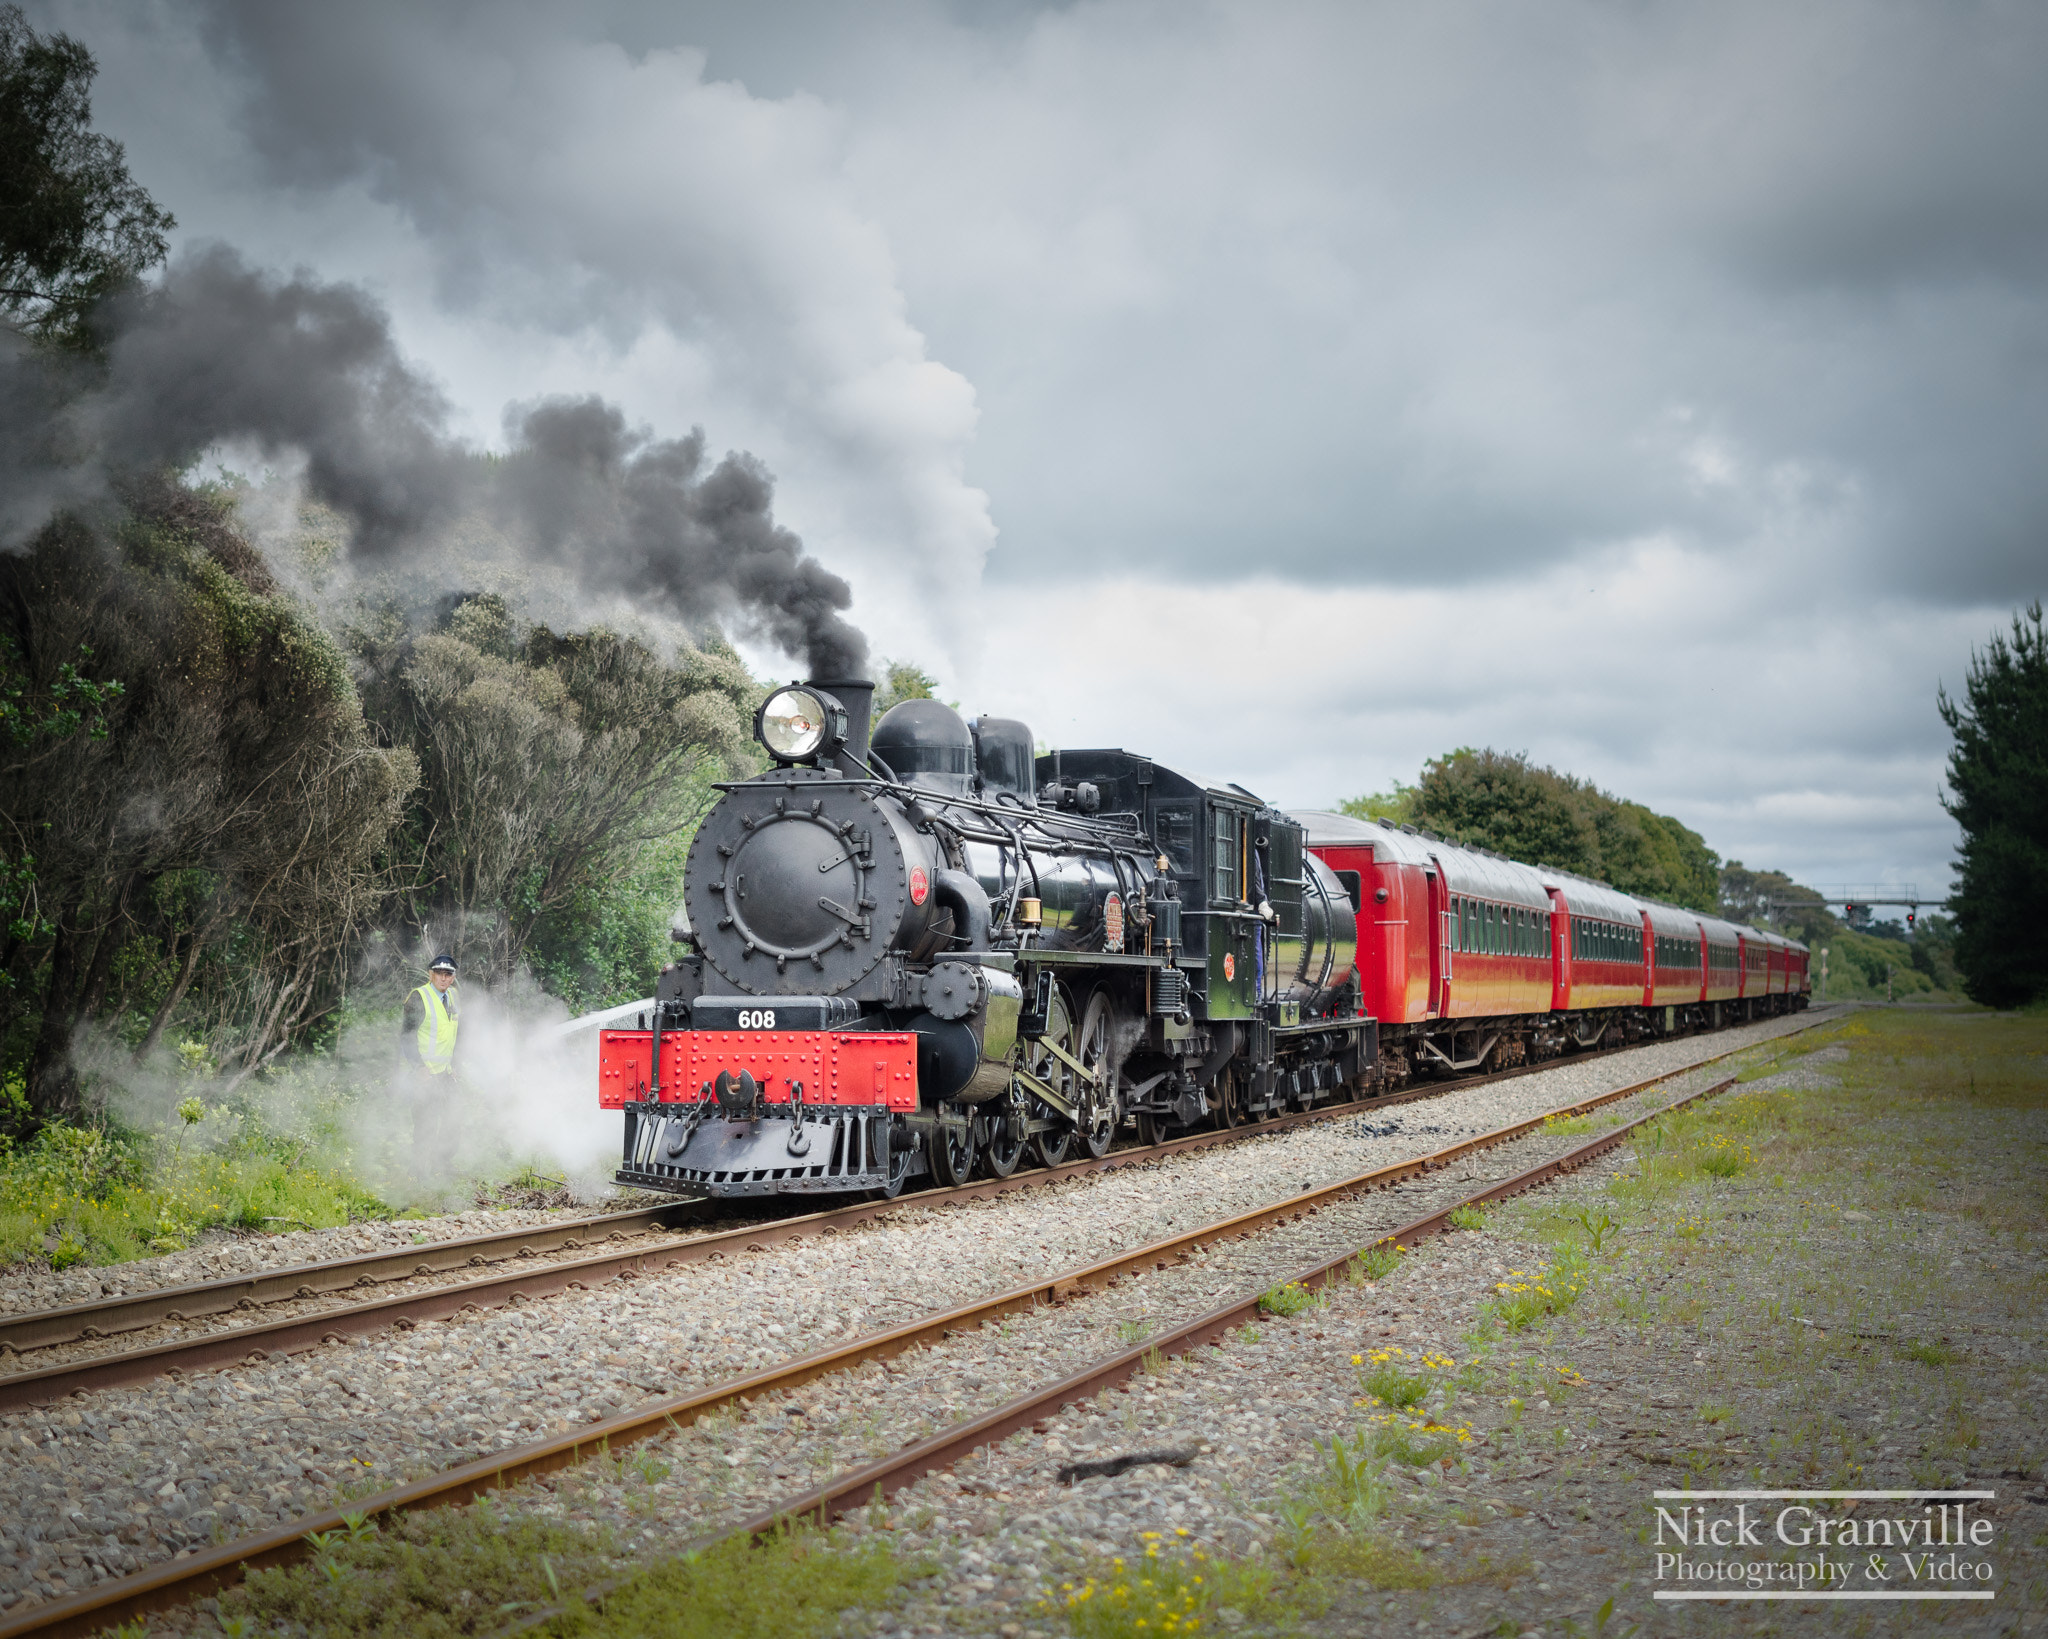 Sony a7R + Sony FE 50mm F1.8 sample photo. Vintage steam train in action photography